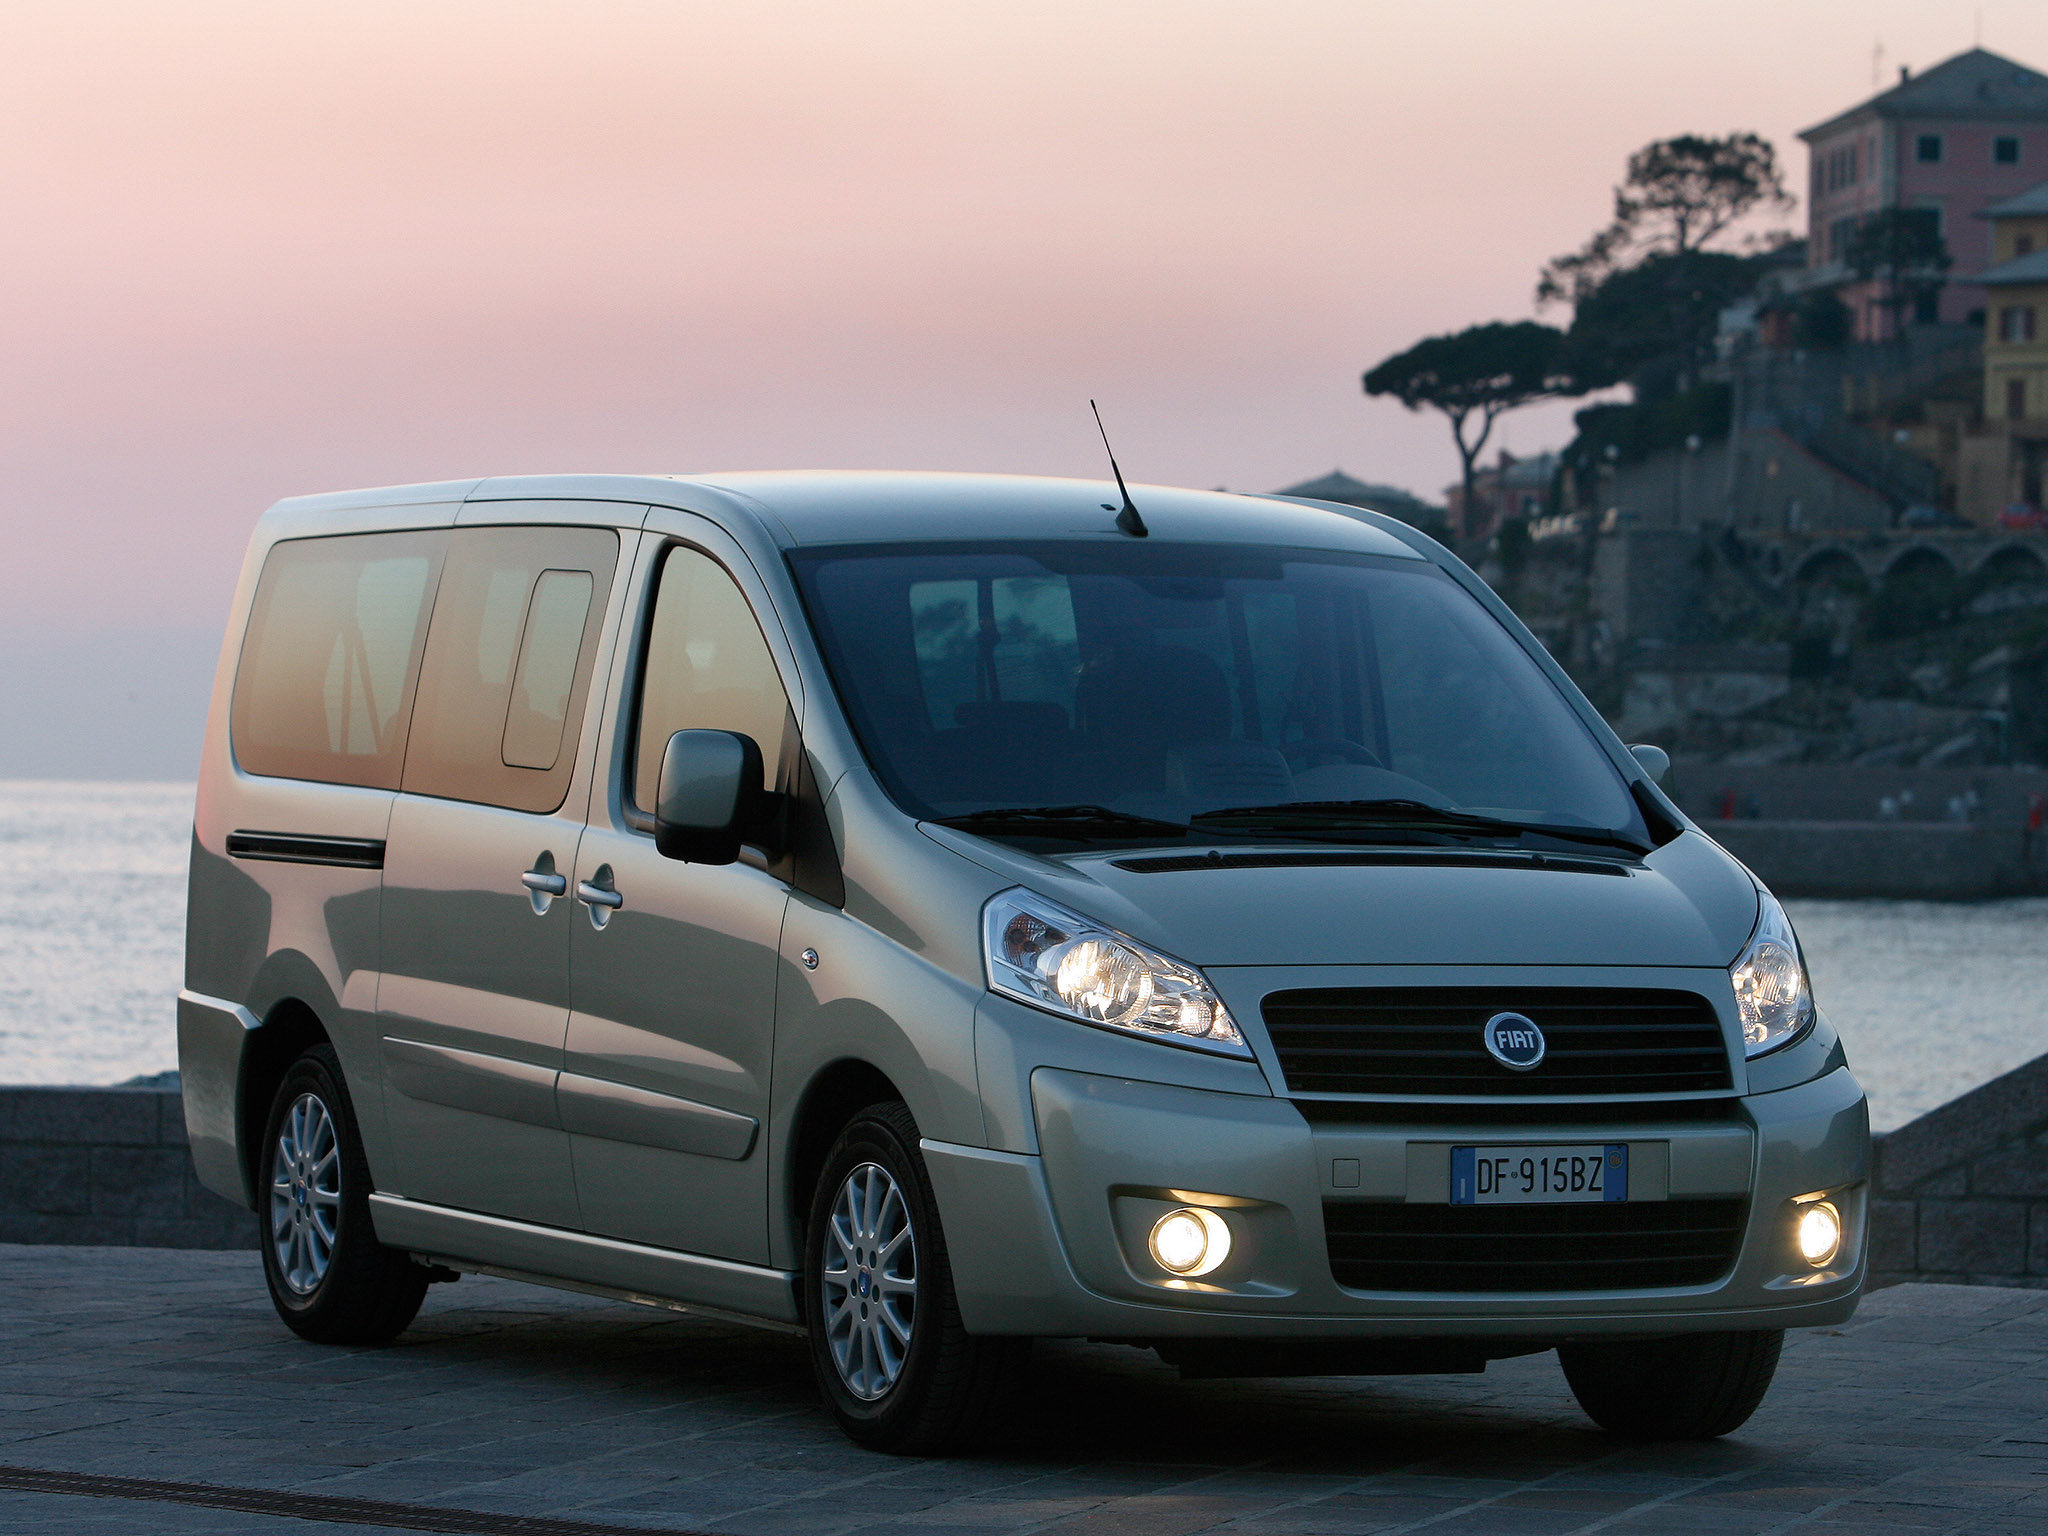 Car in pictures car photo gallery » Fiat Scudo Panorama